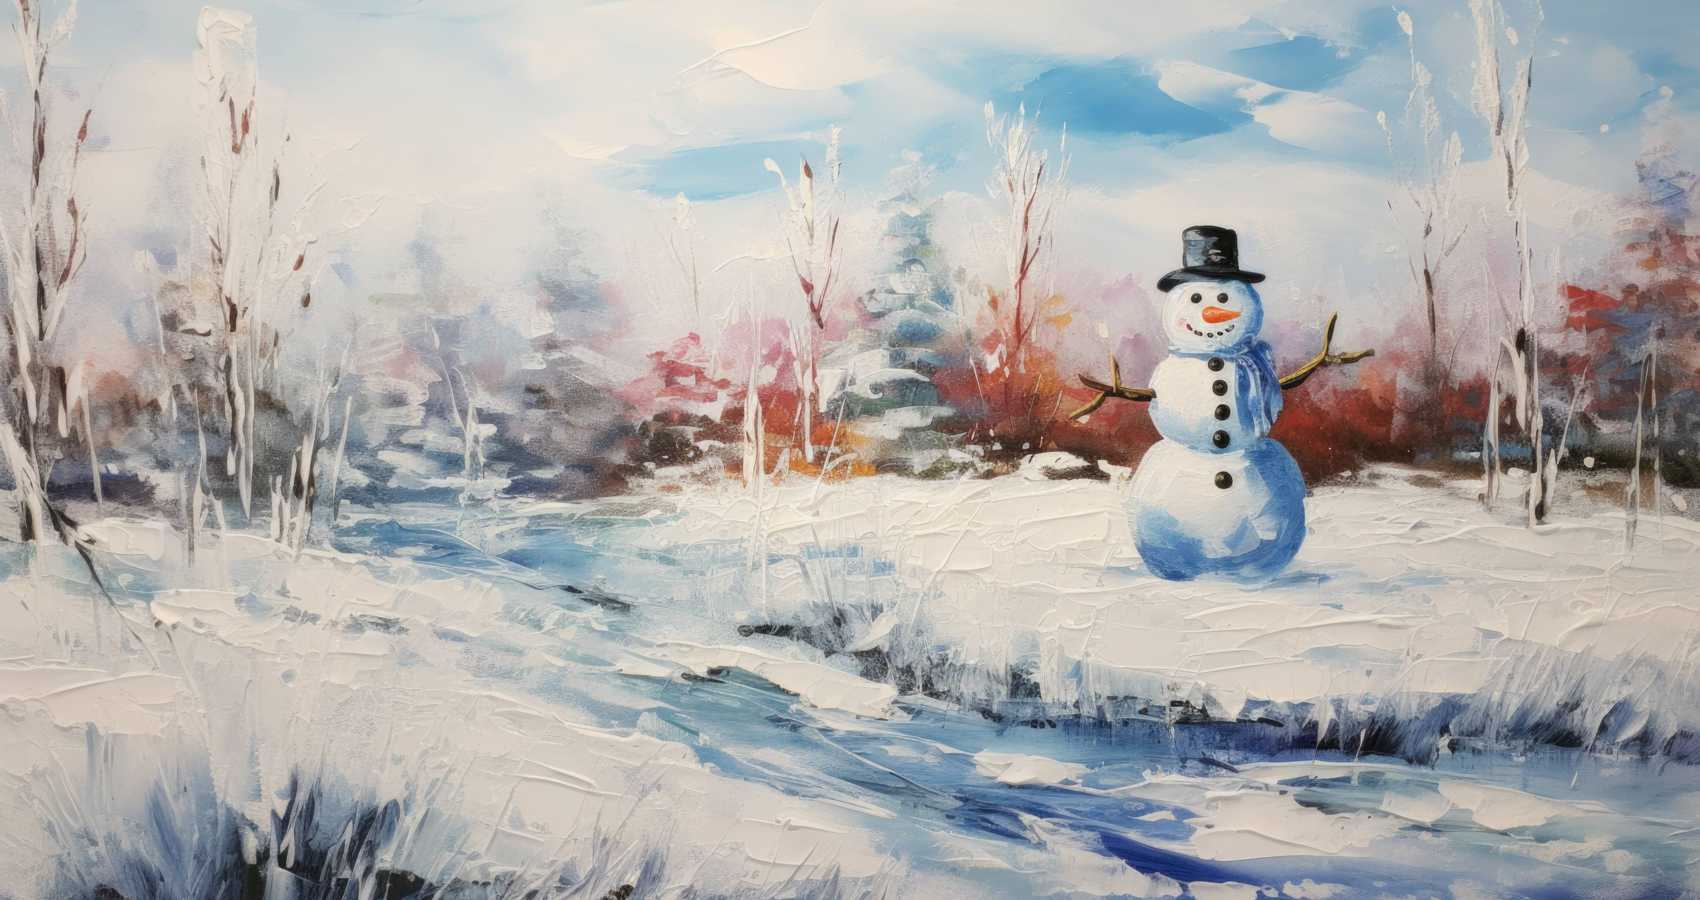 Our Snowman, poetry by LadyLily at Spillwords.com